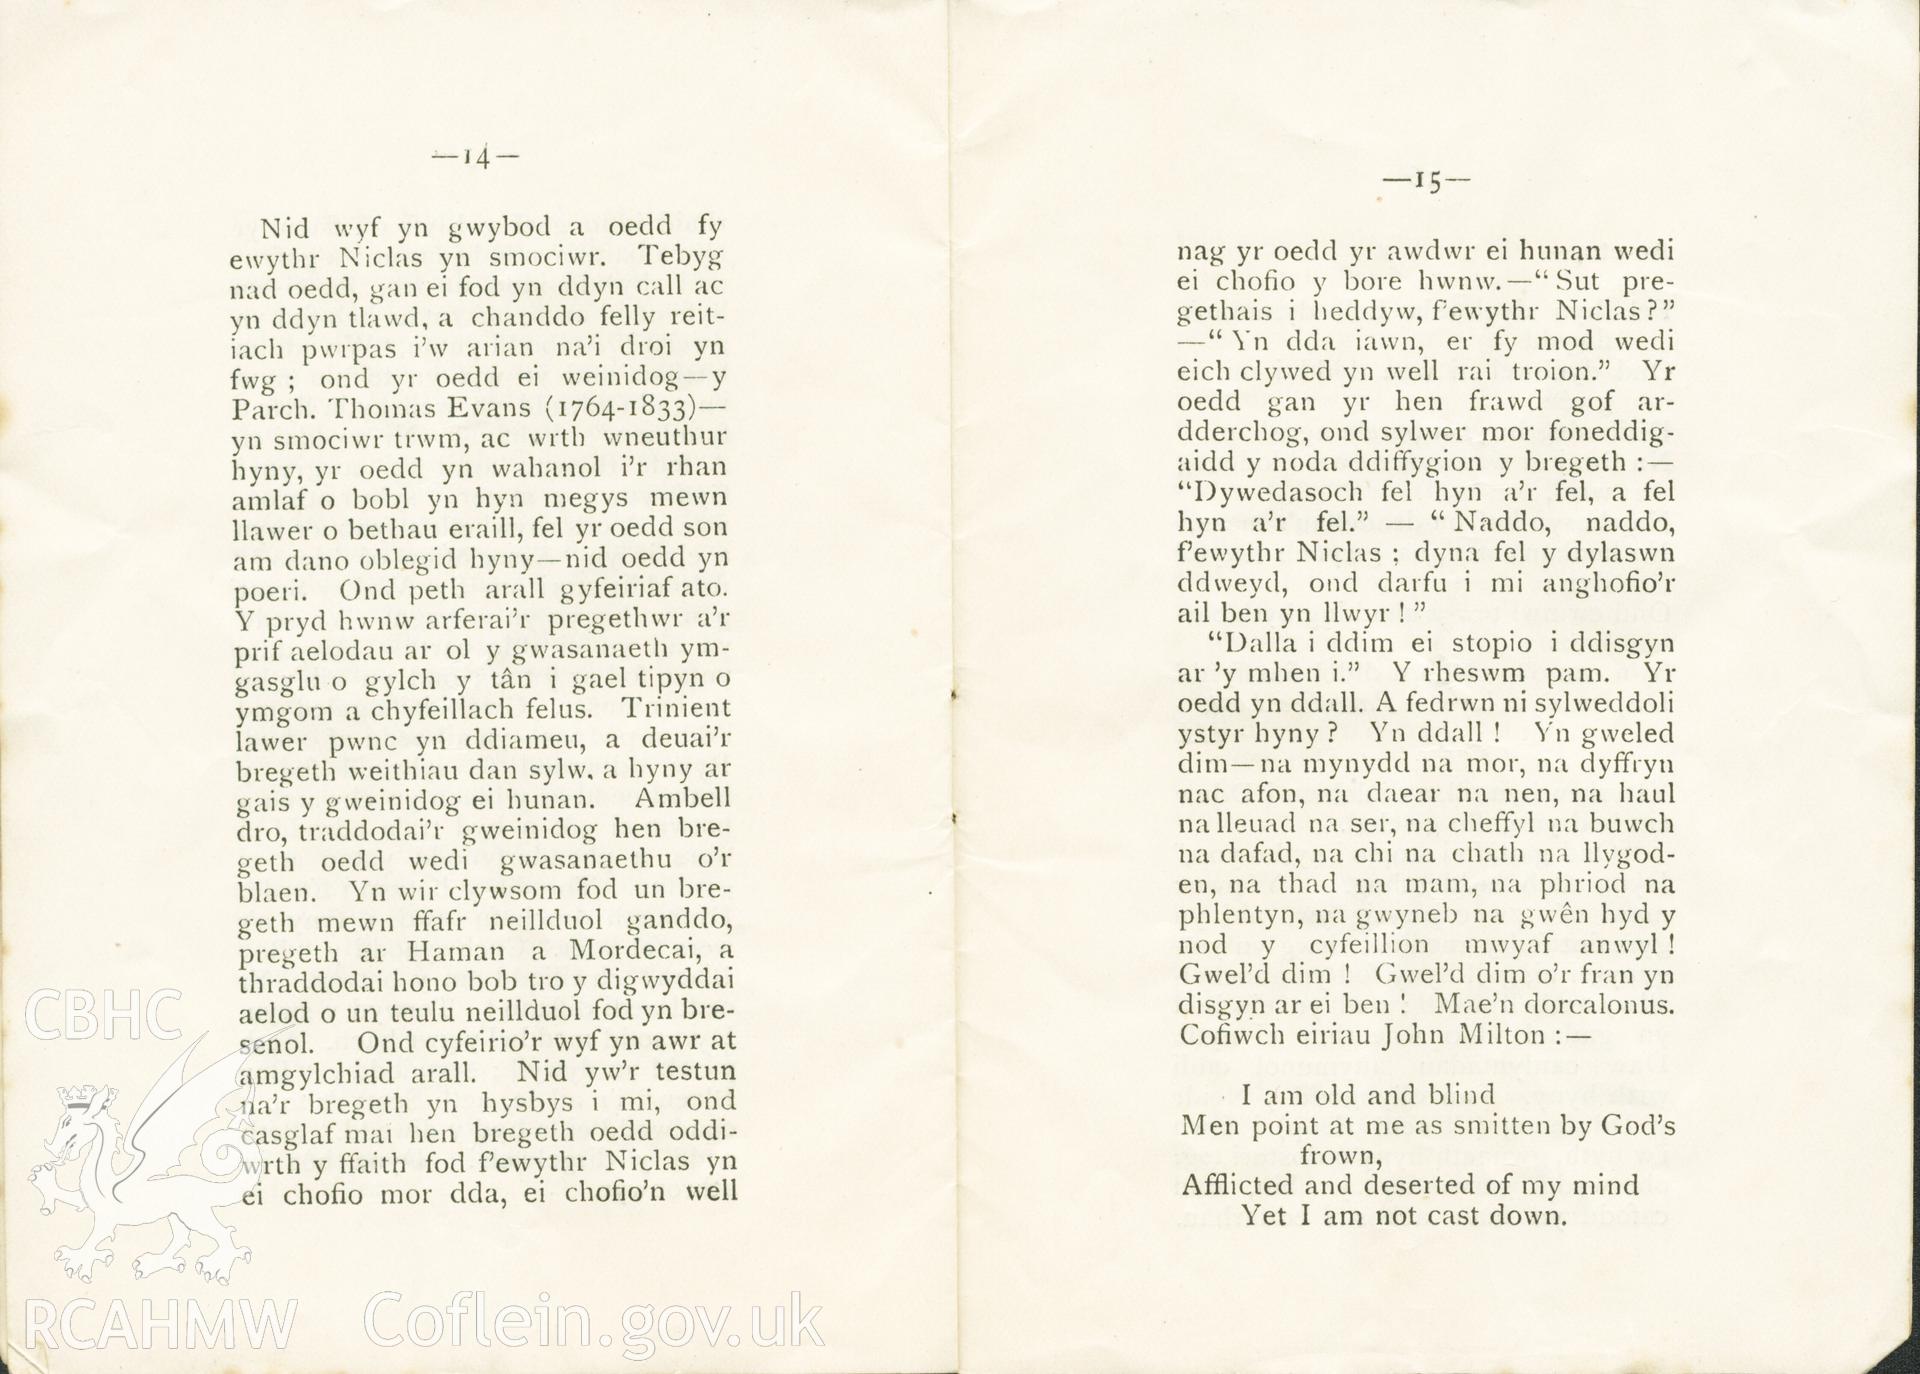 Copy of a biography of Niclas Shams, taken from a presentation to the Hen Dy Cwrdd Self Improvement Society, printed in 1913. Donated to the RCAHMW during the Digital Dissent Project.